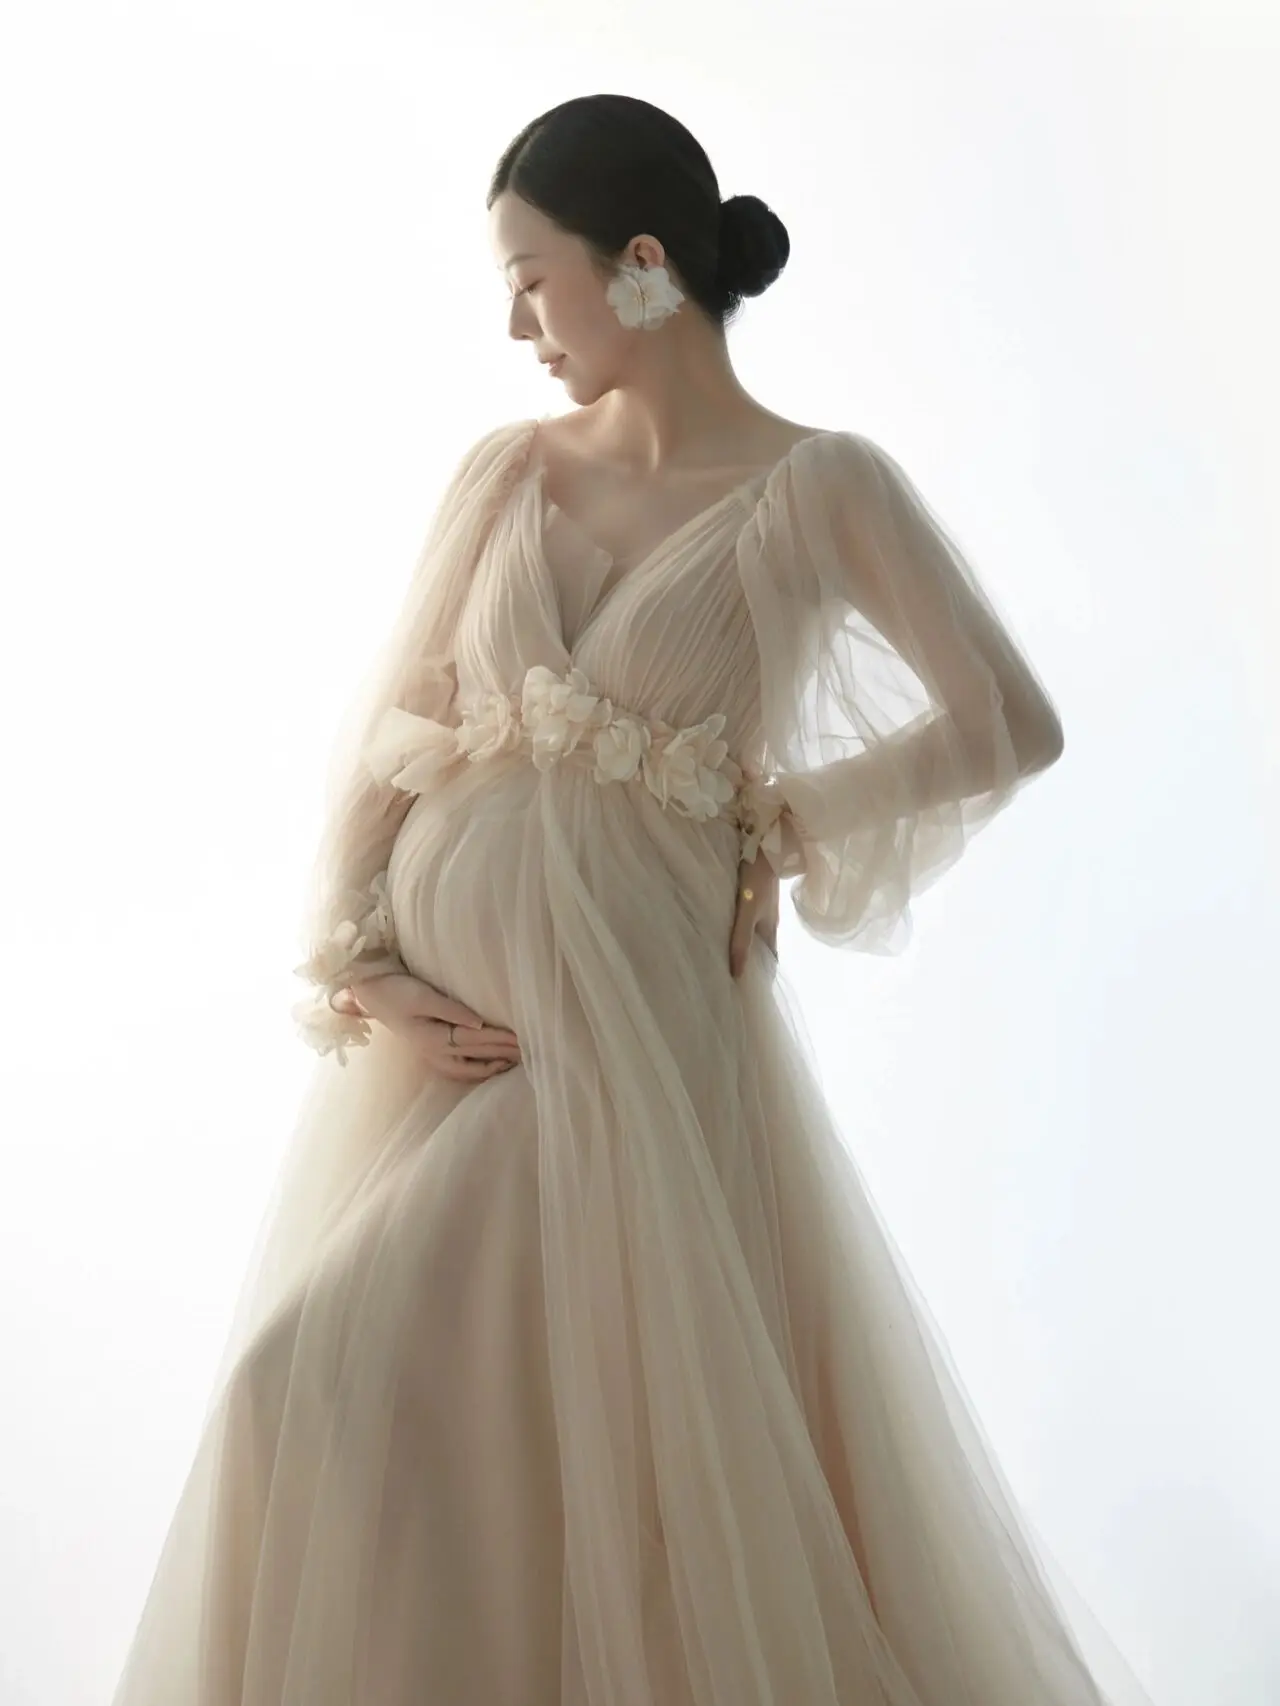 Pregnancy Tulle Dress Baby Showers Champagne Dress Beautiful Mesh Guipure V-Neck Anniversary Maternity Dress Ear Stud